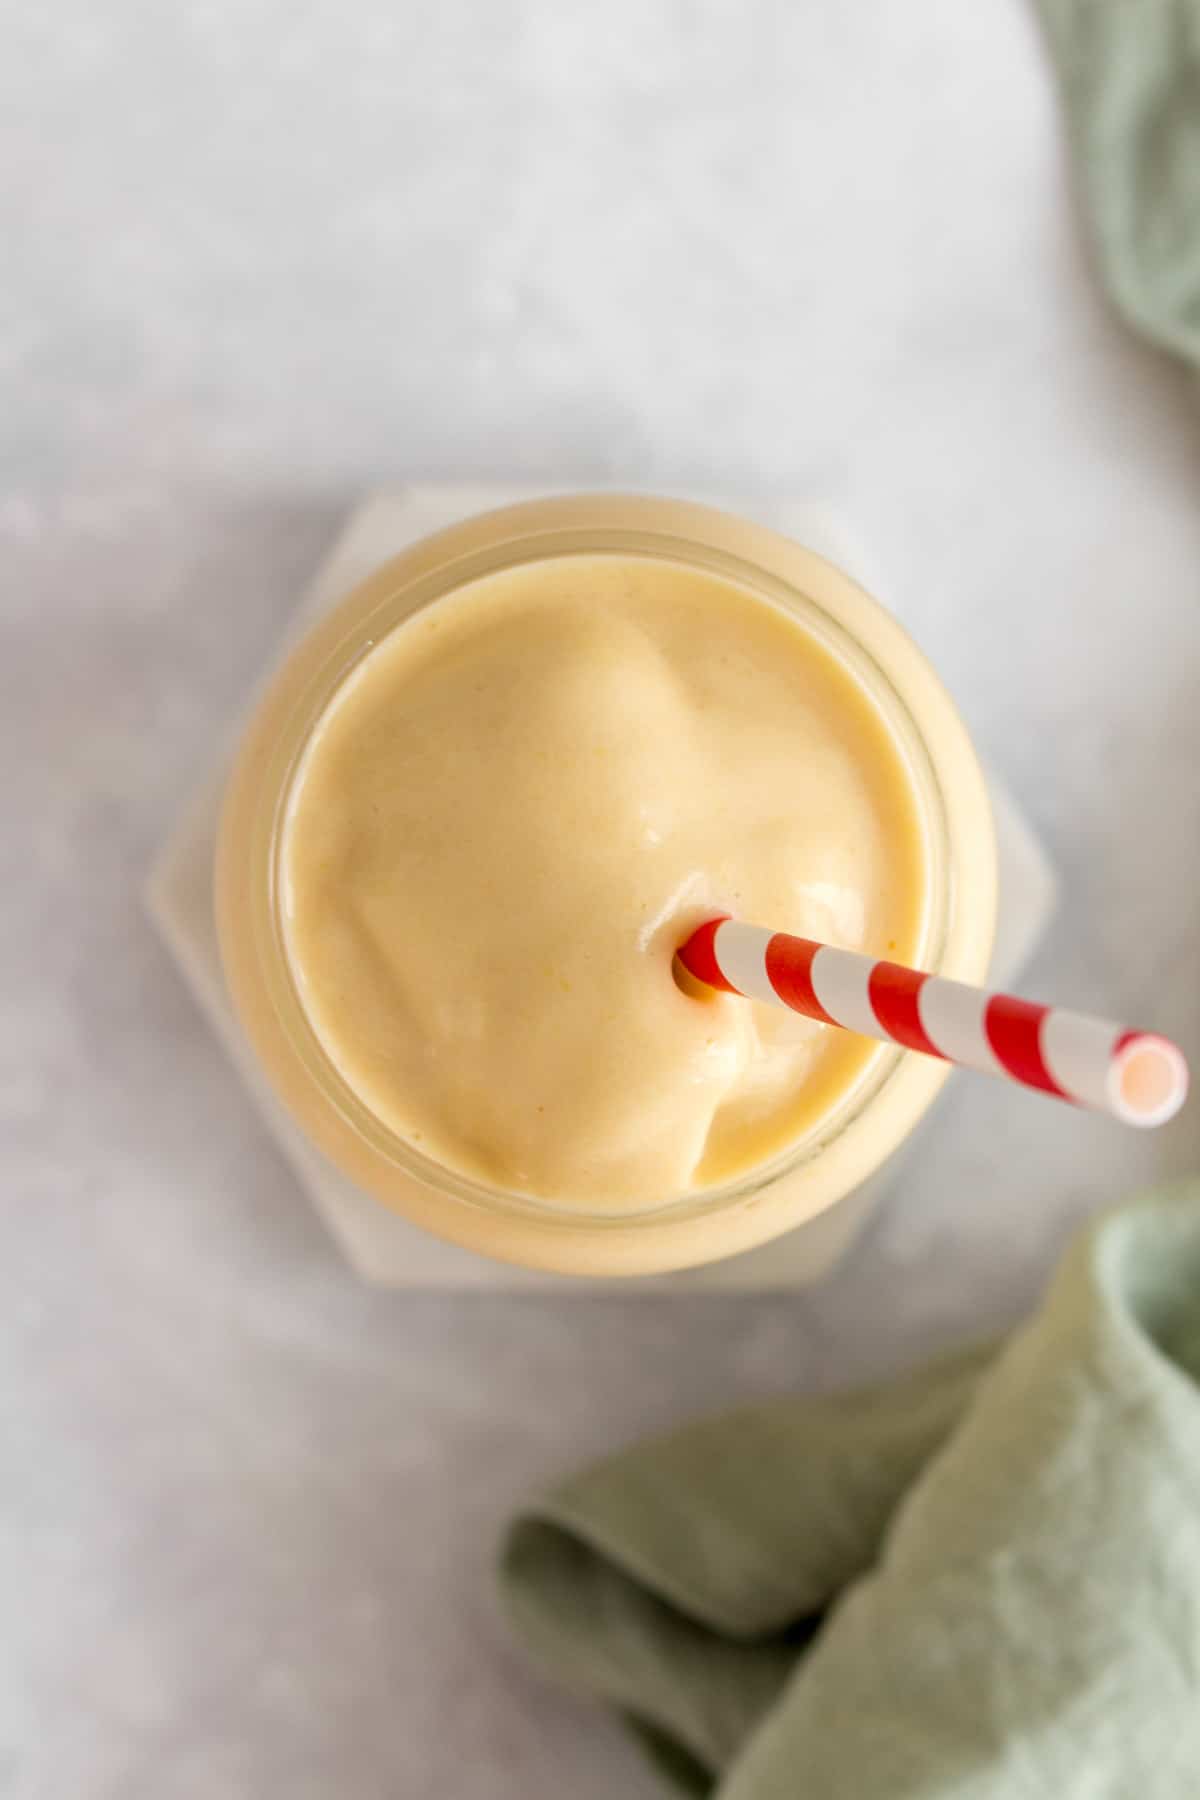 Overhead view of a glass of peach banana smoothie and a striped straw.